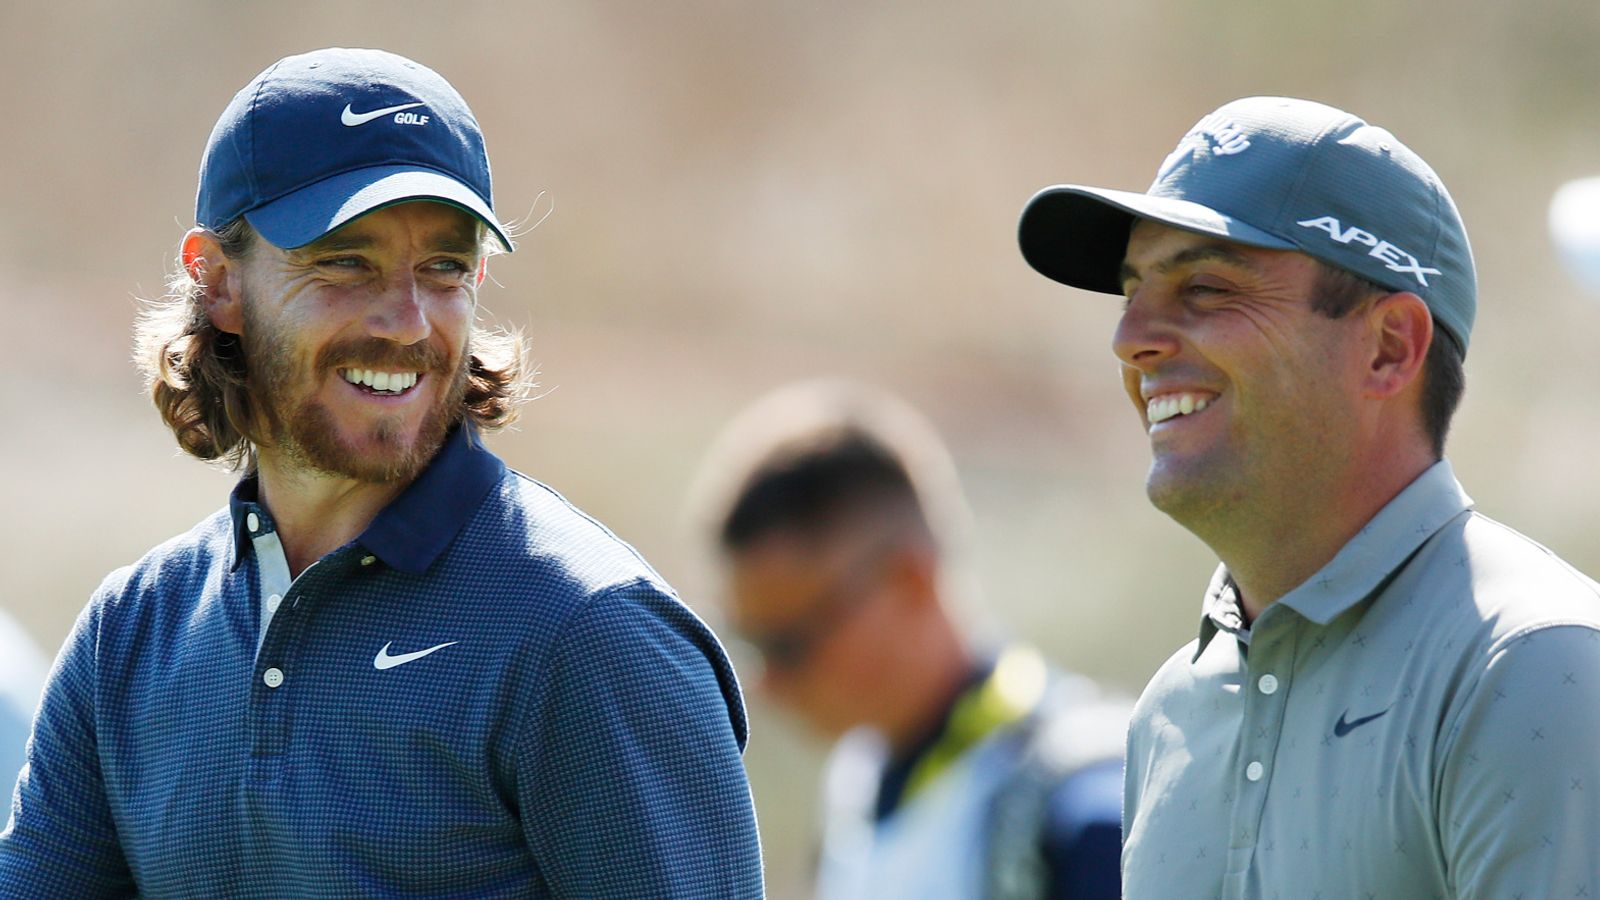 Tommy Fleetwood, Francesco Molinari named playing captains for